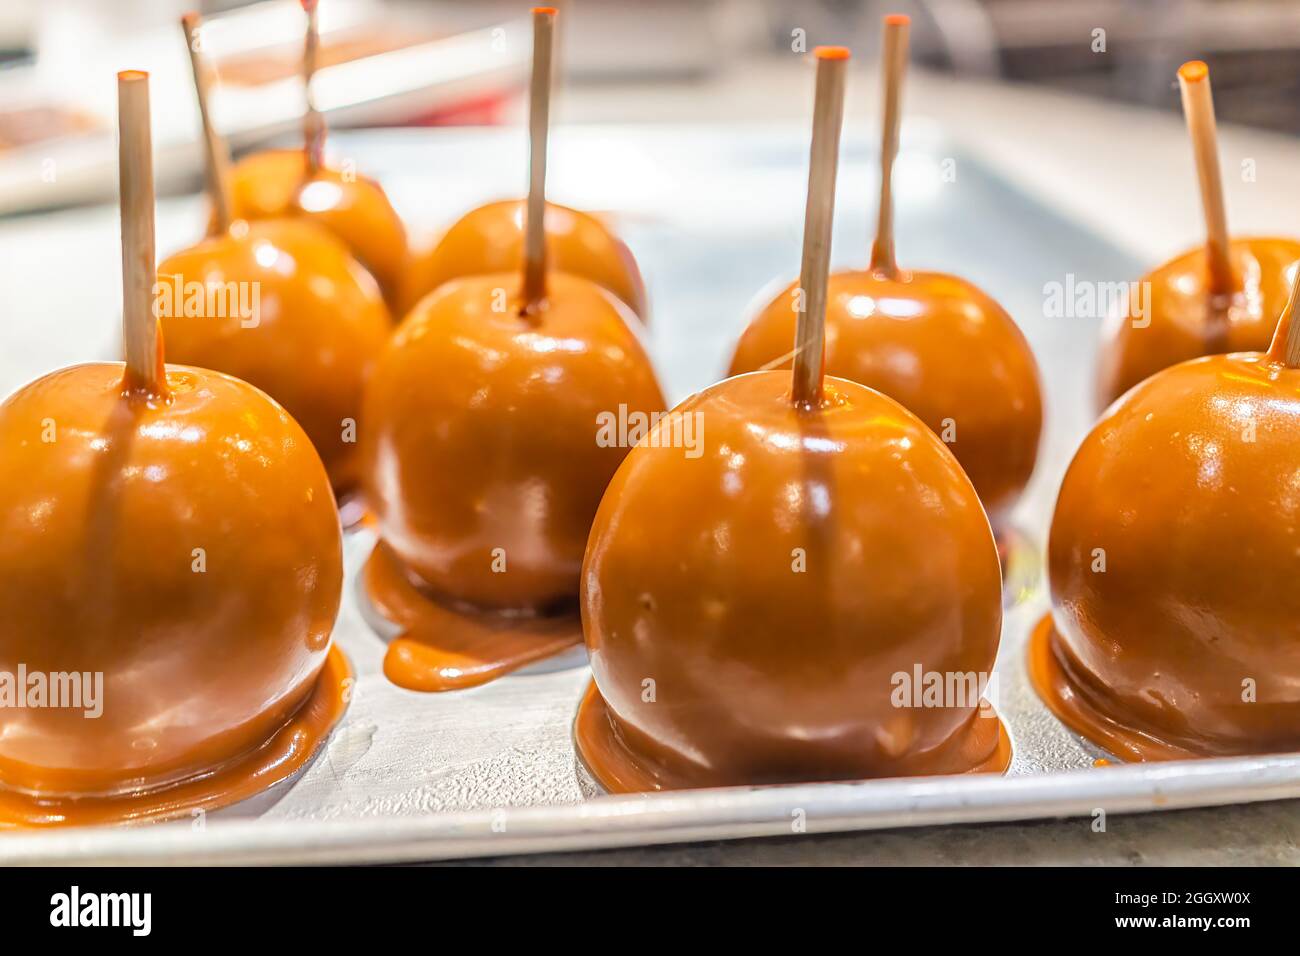 Caramel caramelized apples with sticks sweet candied food dessert on retail display in bakery store shop cafe in Key West, Florida Stock Photo